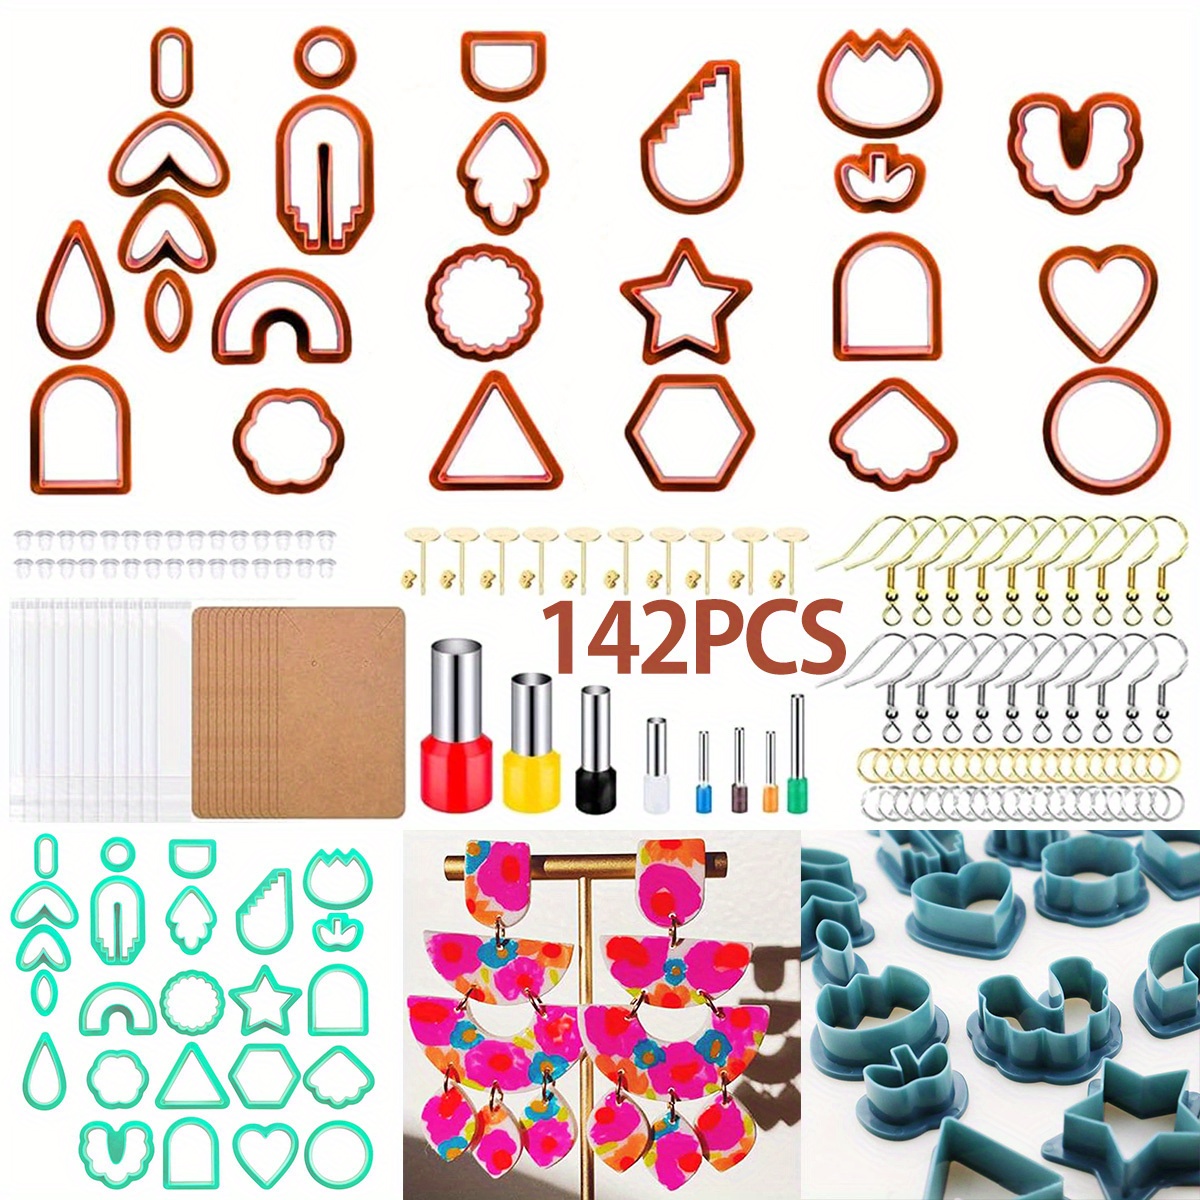 Polymer Clay Cutters Set Stainless Steel Multiple Shape Clay Earring  Cutters Set Reusable Polymer Clay Molds Set with Earring Accessories for  Earrings